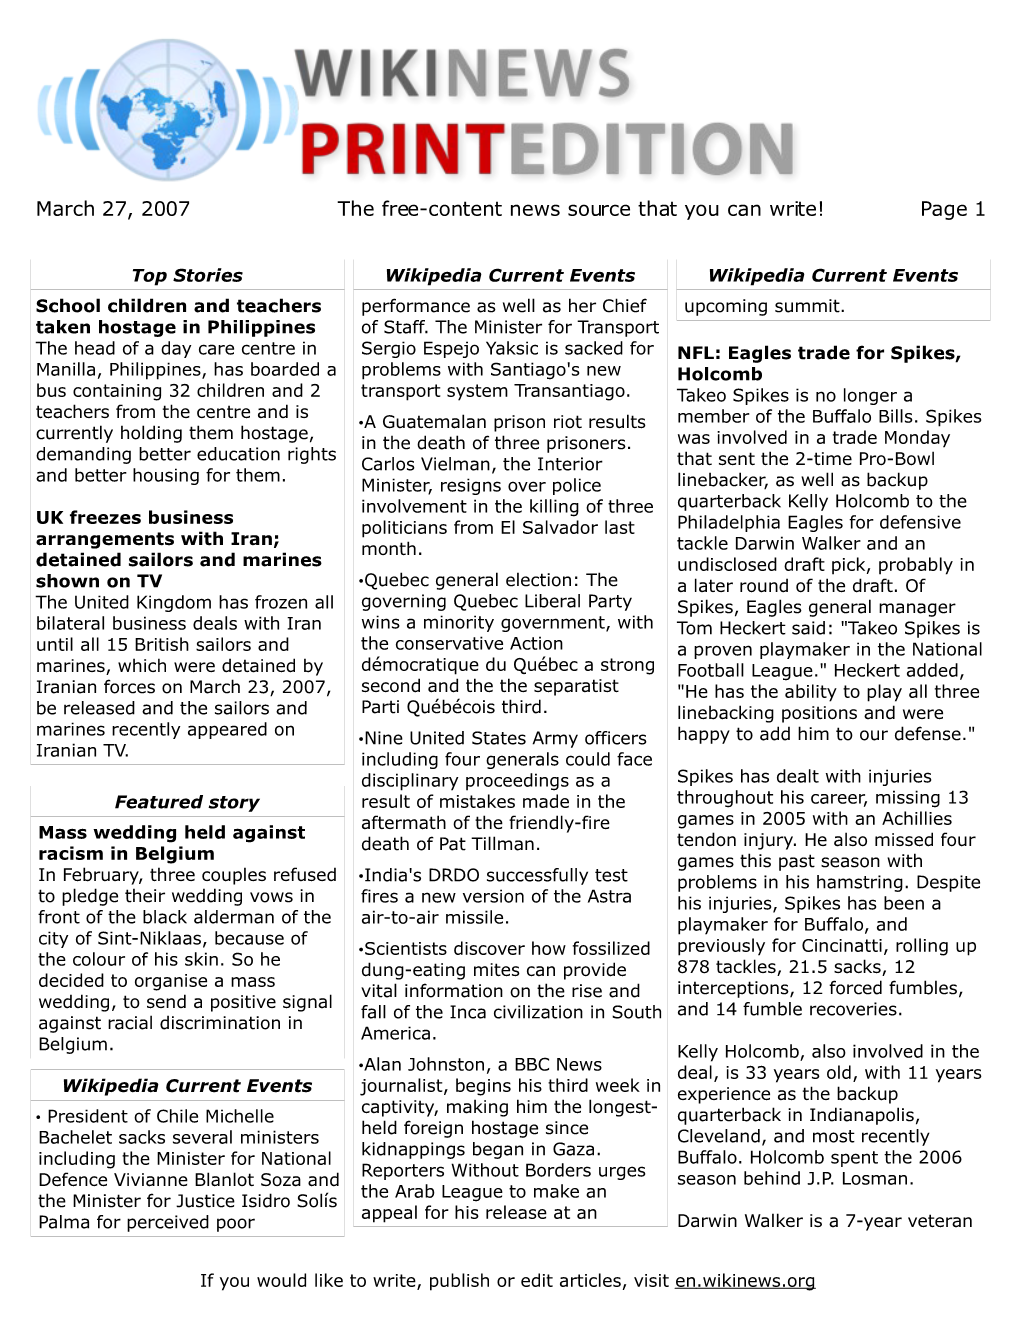 March 27, 2007 the Free-Content News Source That You Can Write! Page 1